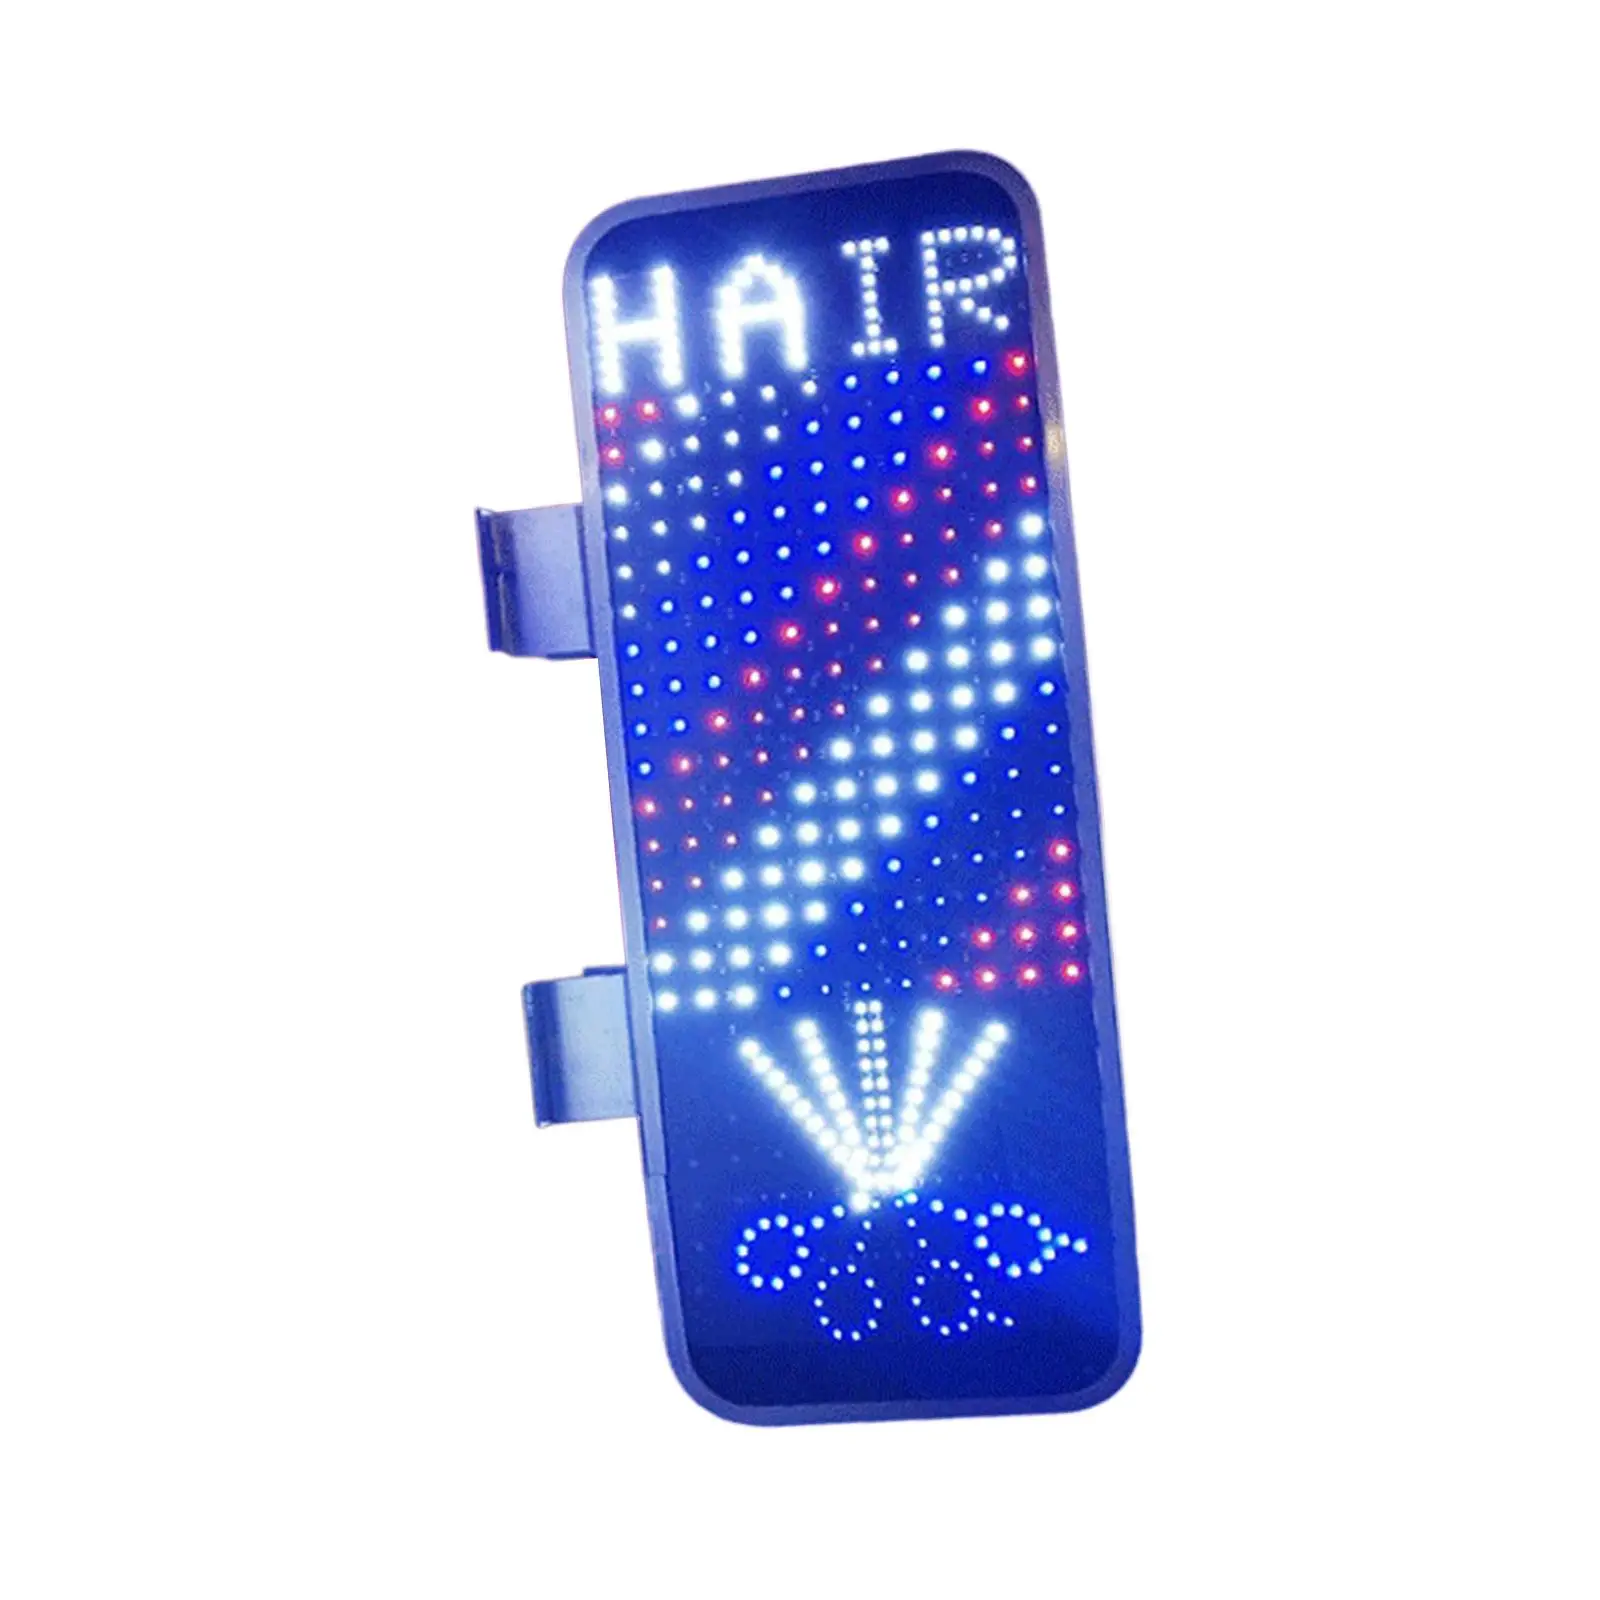 Barber Shop Sign Rotating Stripes Lights Red Blue White Neon Signs Outdoor Wall Mounted Novelty Lighting Pole LED Light